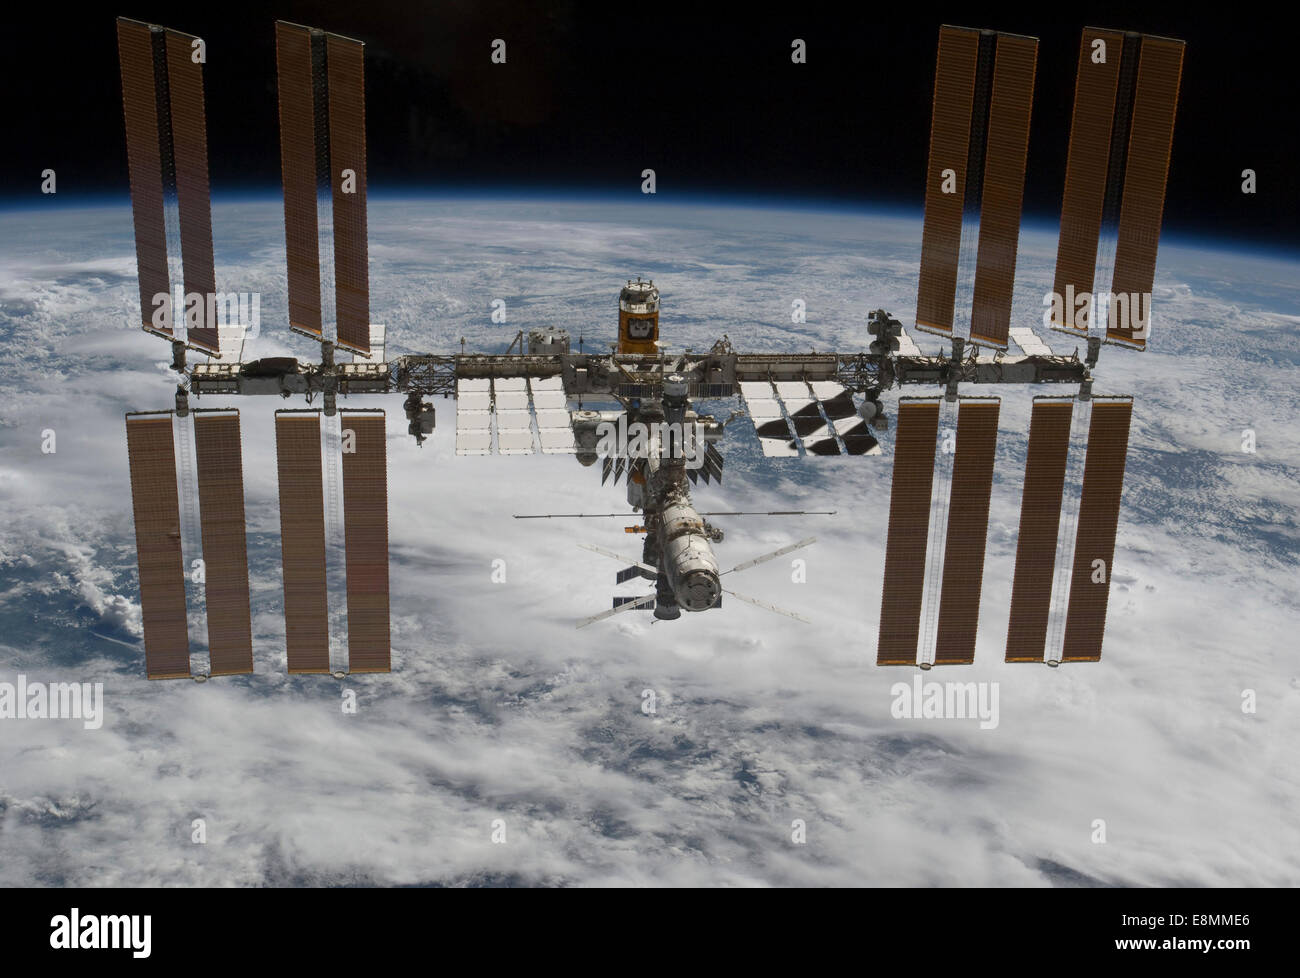 March 7, 2011 - The International Space Station backdropped against clouds over Earth. Stock Photo